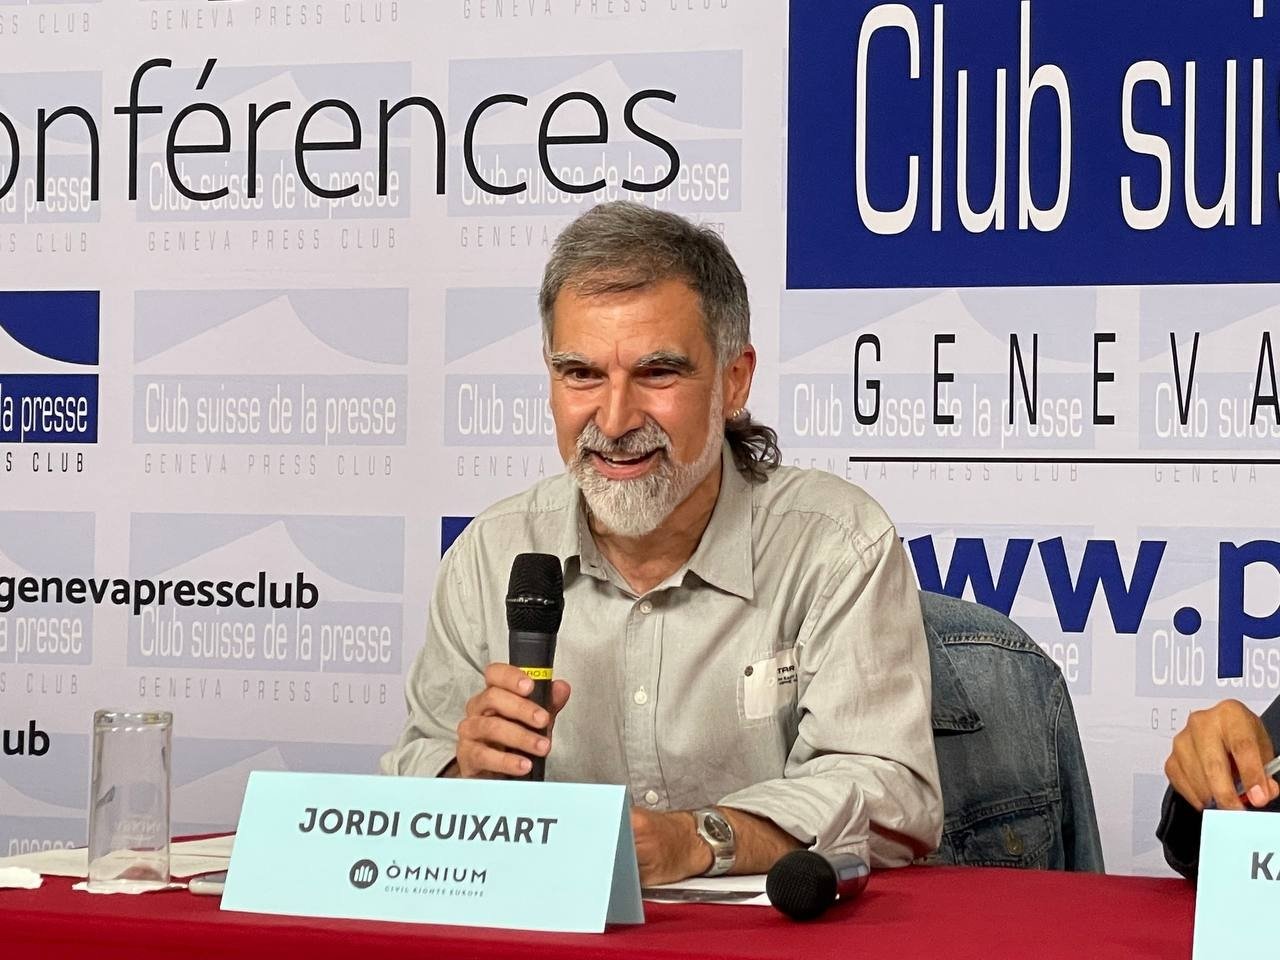 Jordi Cuixart takes Catalangate to the UN: "Spain is still spying on dissidence"